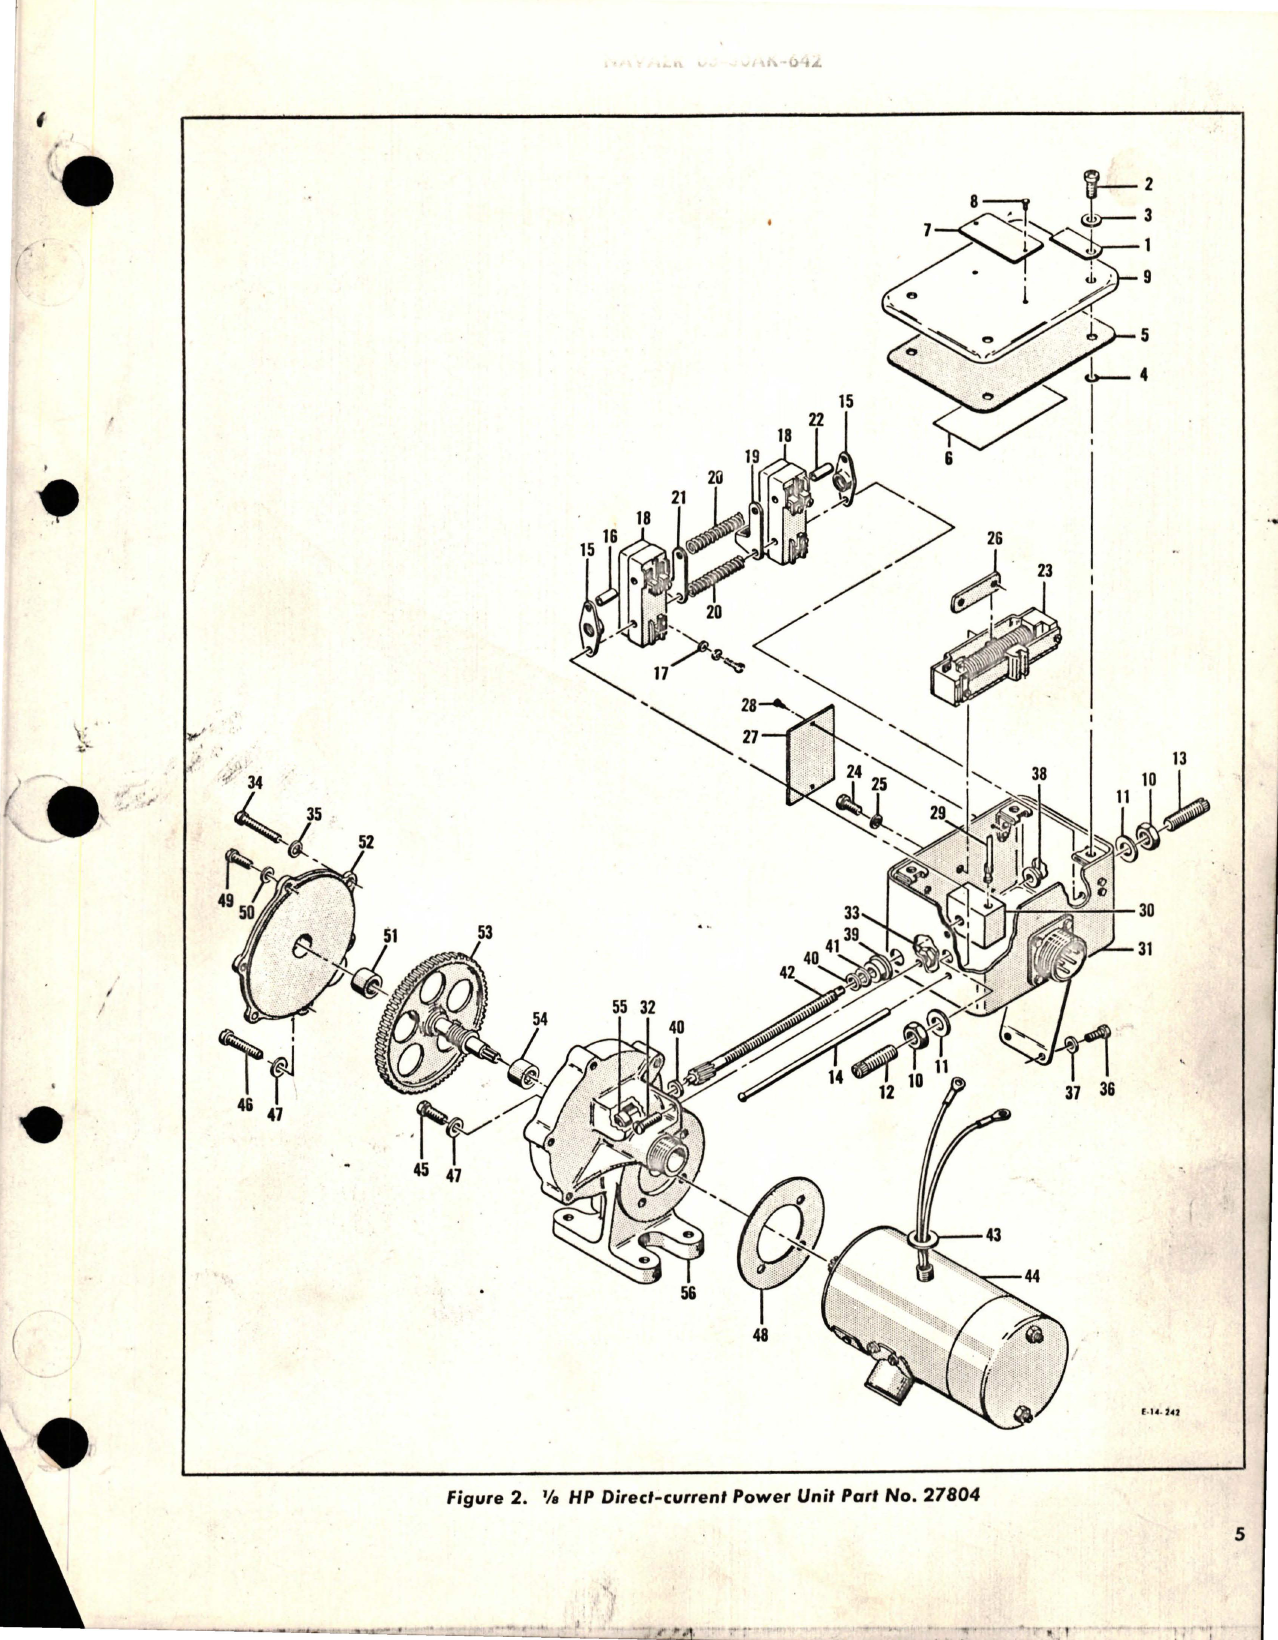 Sample page 5 from AirCorps Library document: Overhaul Instructions with Parts for Direct Current Power Unit - 1/8